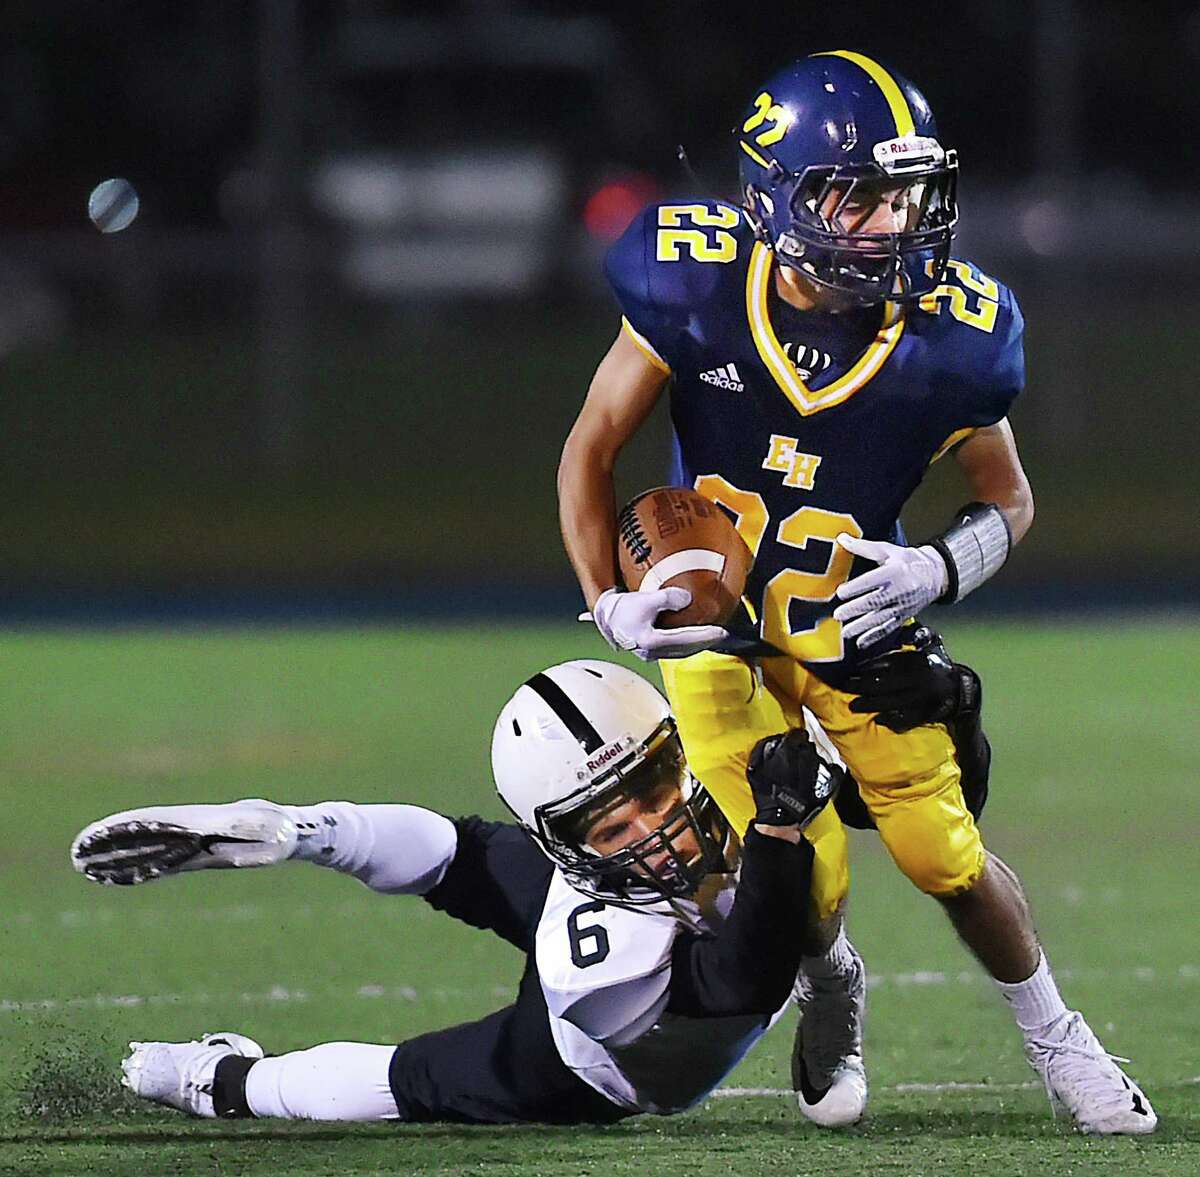 East Haven‘s Jacob Araujo attempts to escape a tackle by Xavier’s Mike Astorino on Friday.